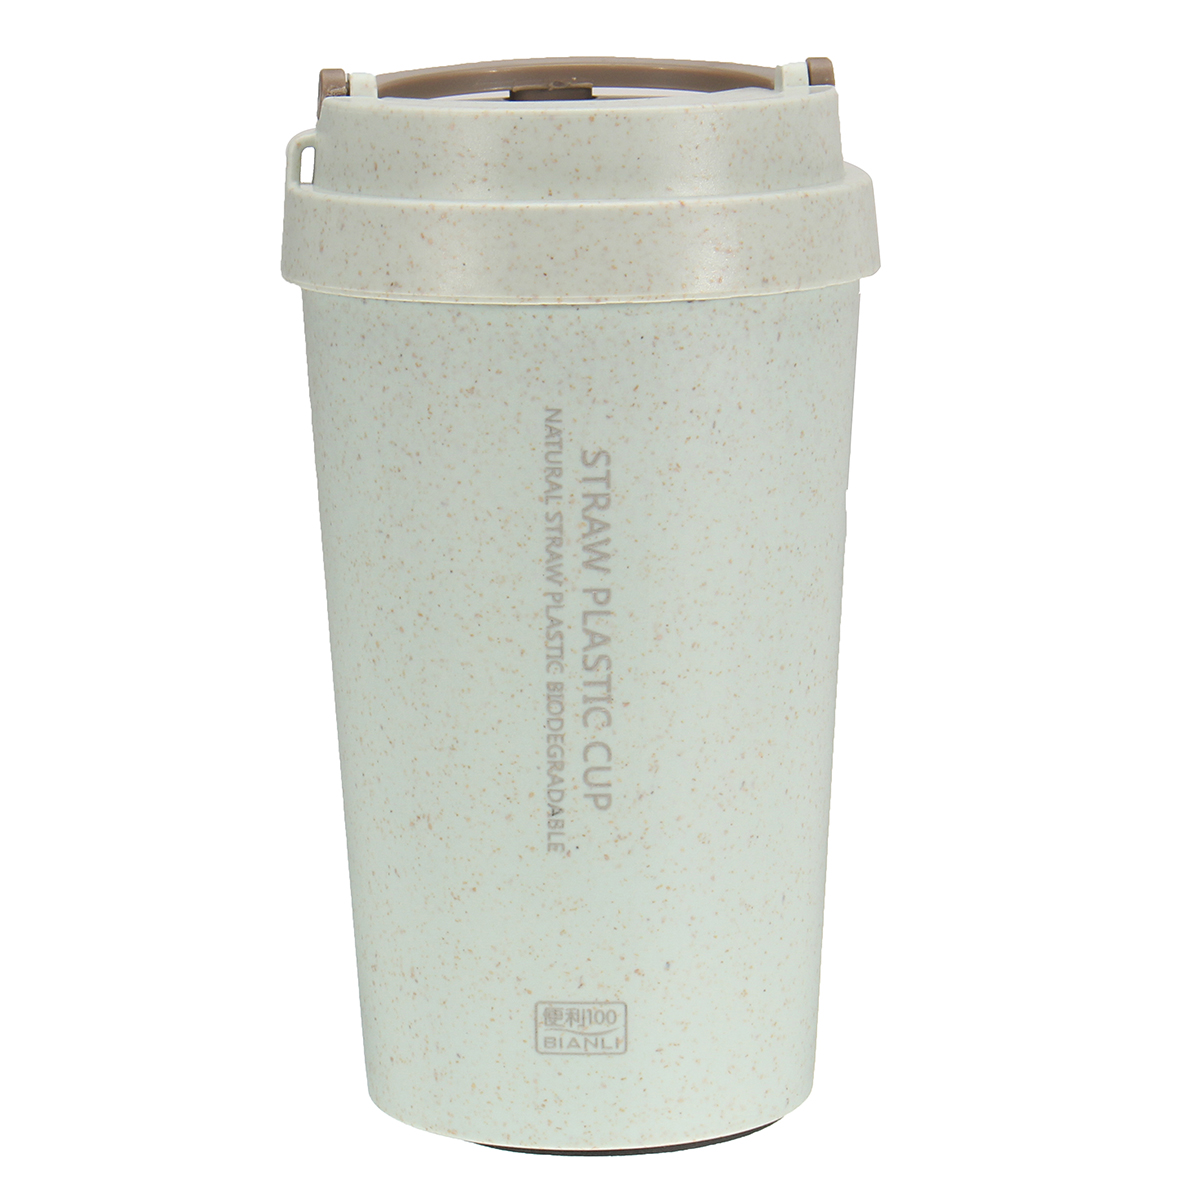 400L-Wheat-Straw-Portable-Double-wall-Vacuum-Bottle-Coffee-Cup-Insulated-Mug-Water-Bottle-1334457